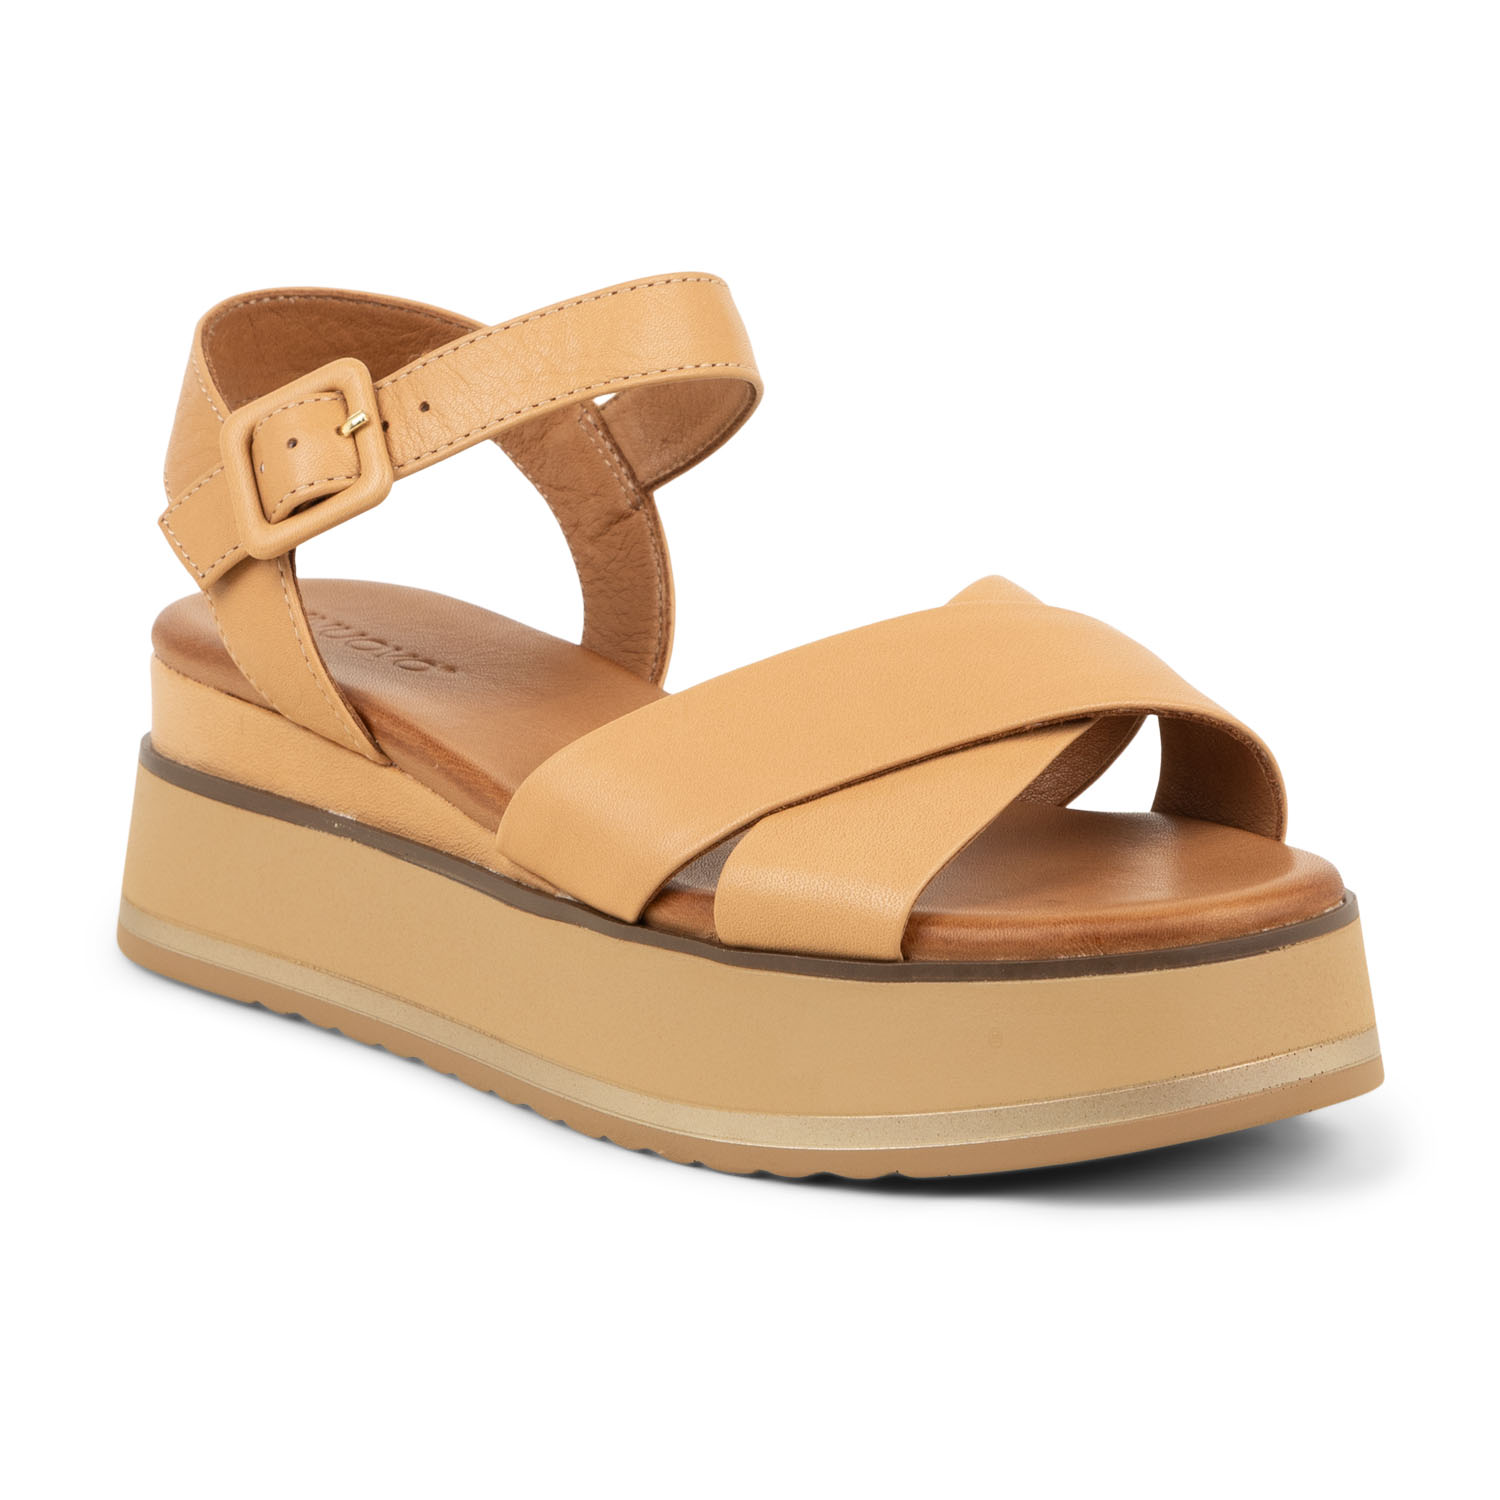 02 - INDIA - INUOVO - Sandales - Cuir